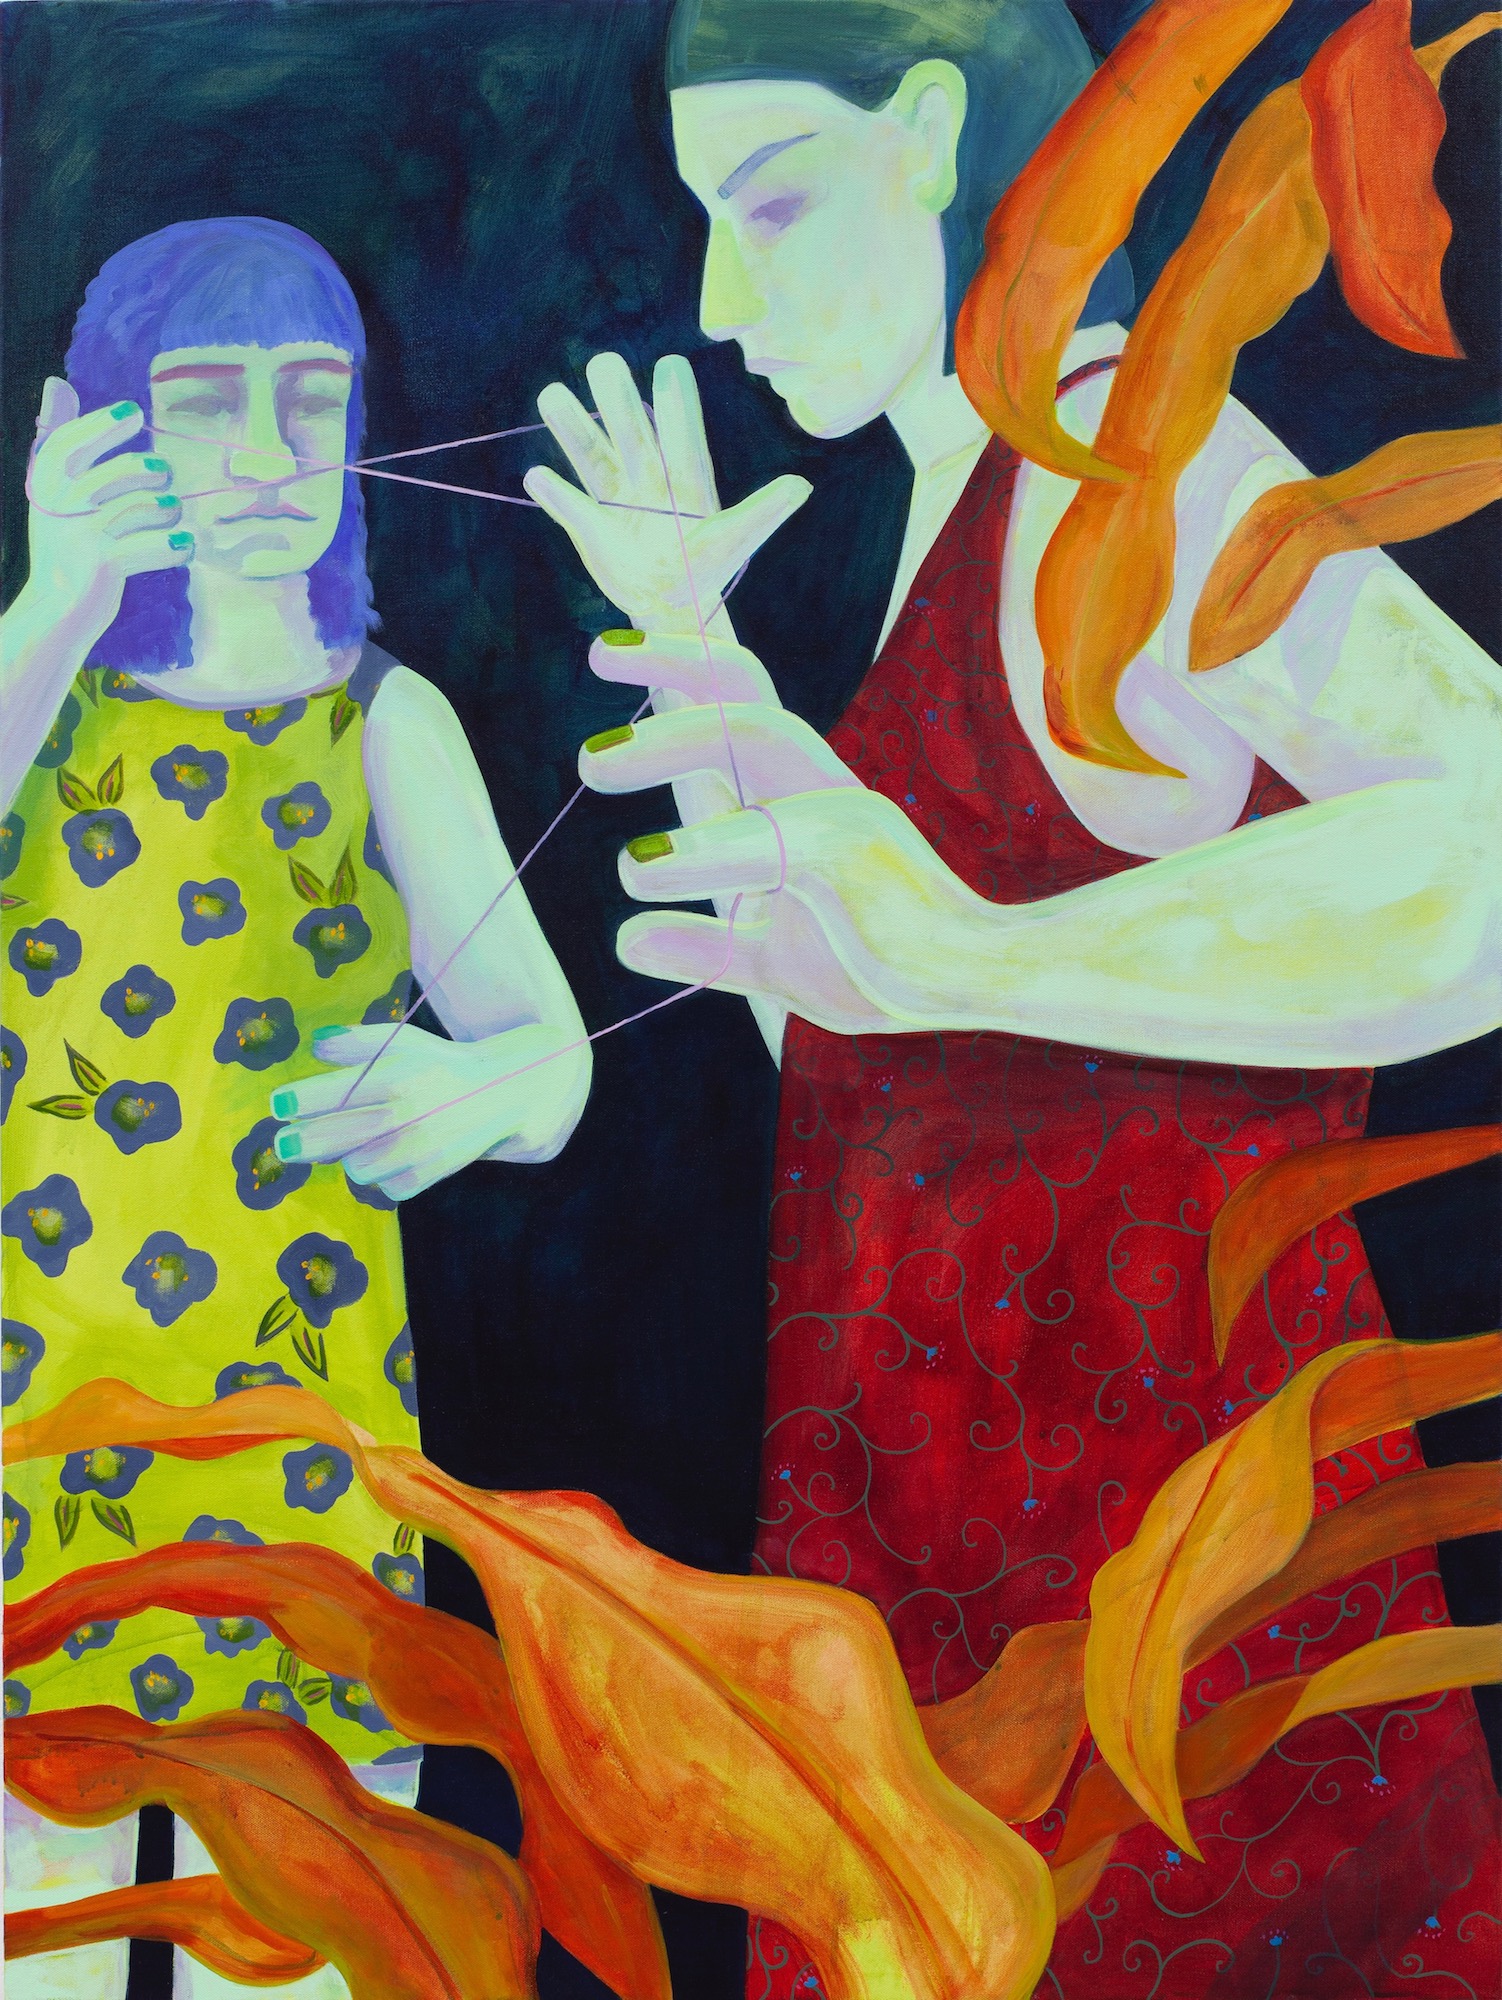 An acrylic painting of two luminous figures against a dark backgrounf with a cat's cradle stretched between their hands. 